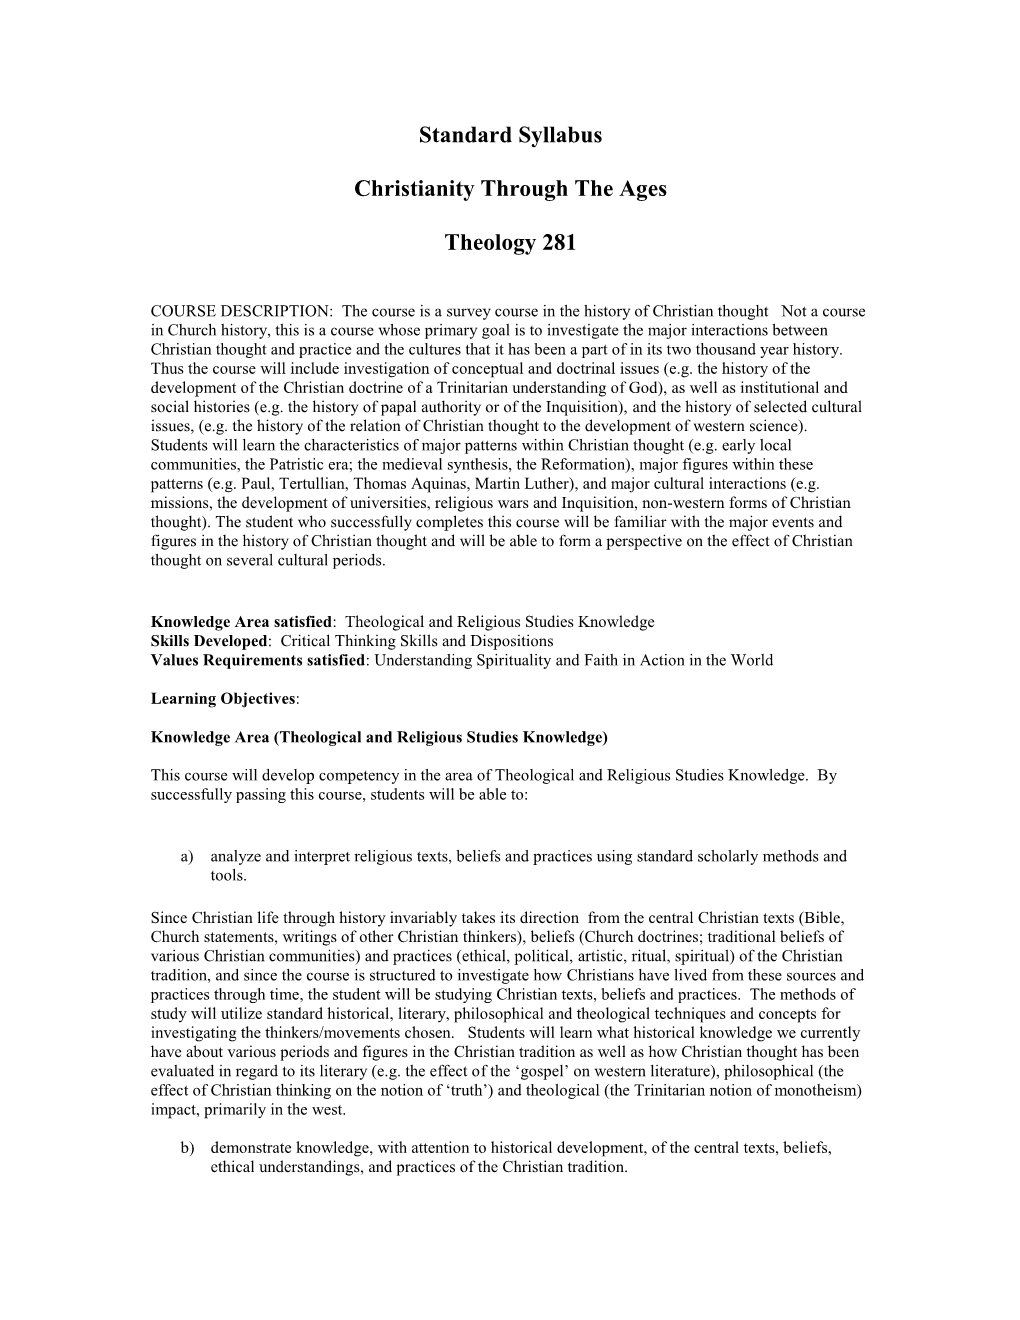 Standard Syllabus Christianity Through the Ages Theology